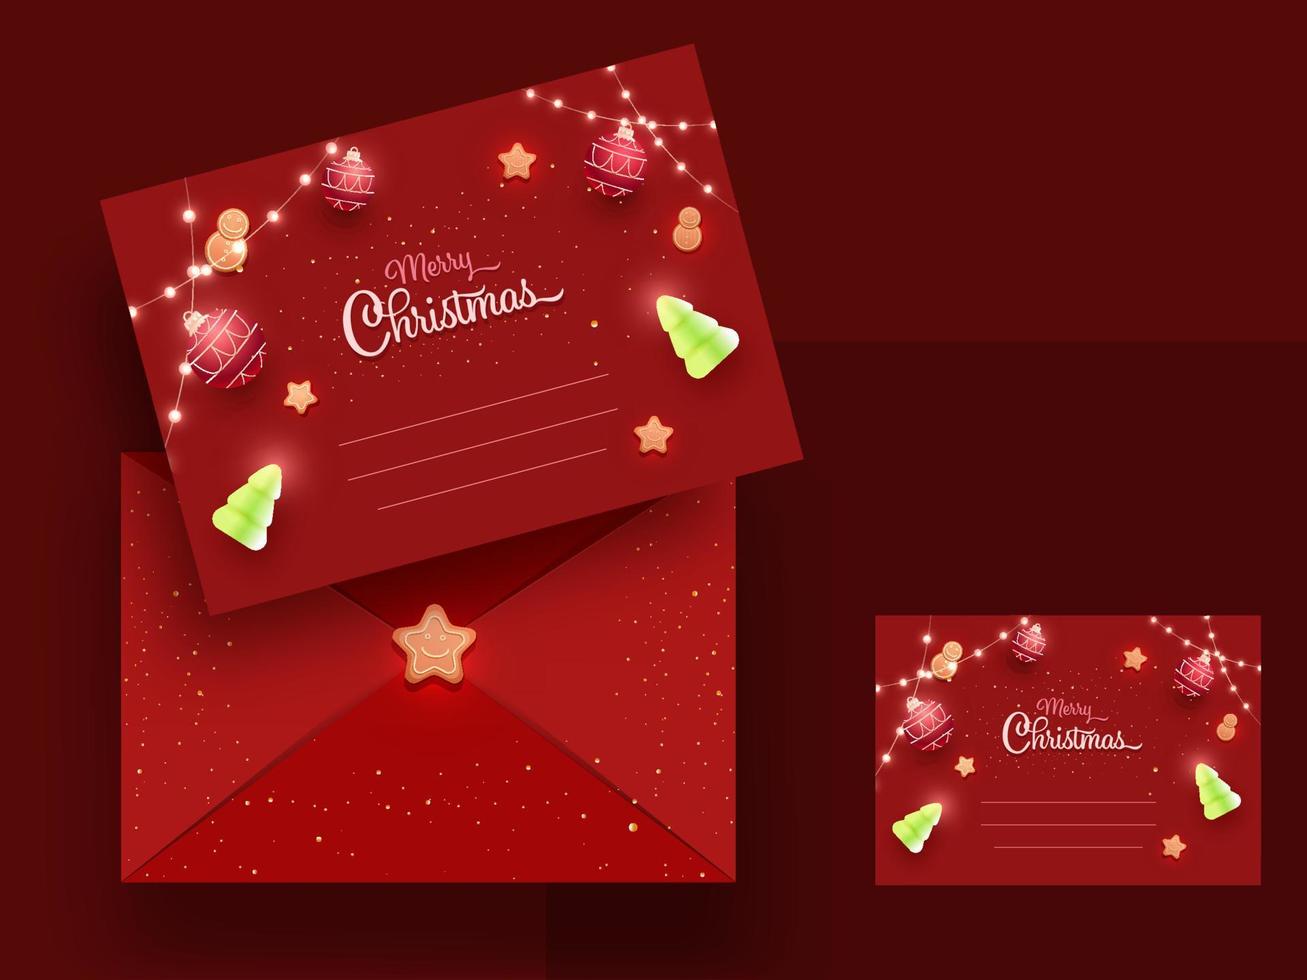 Red Greeting Cards Or Horizontal Invitation Template With Envelope For Merry Christmas. vector